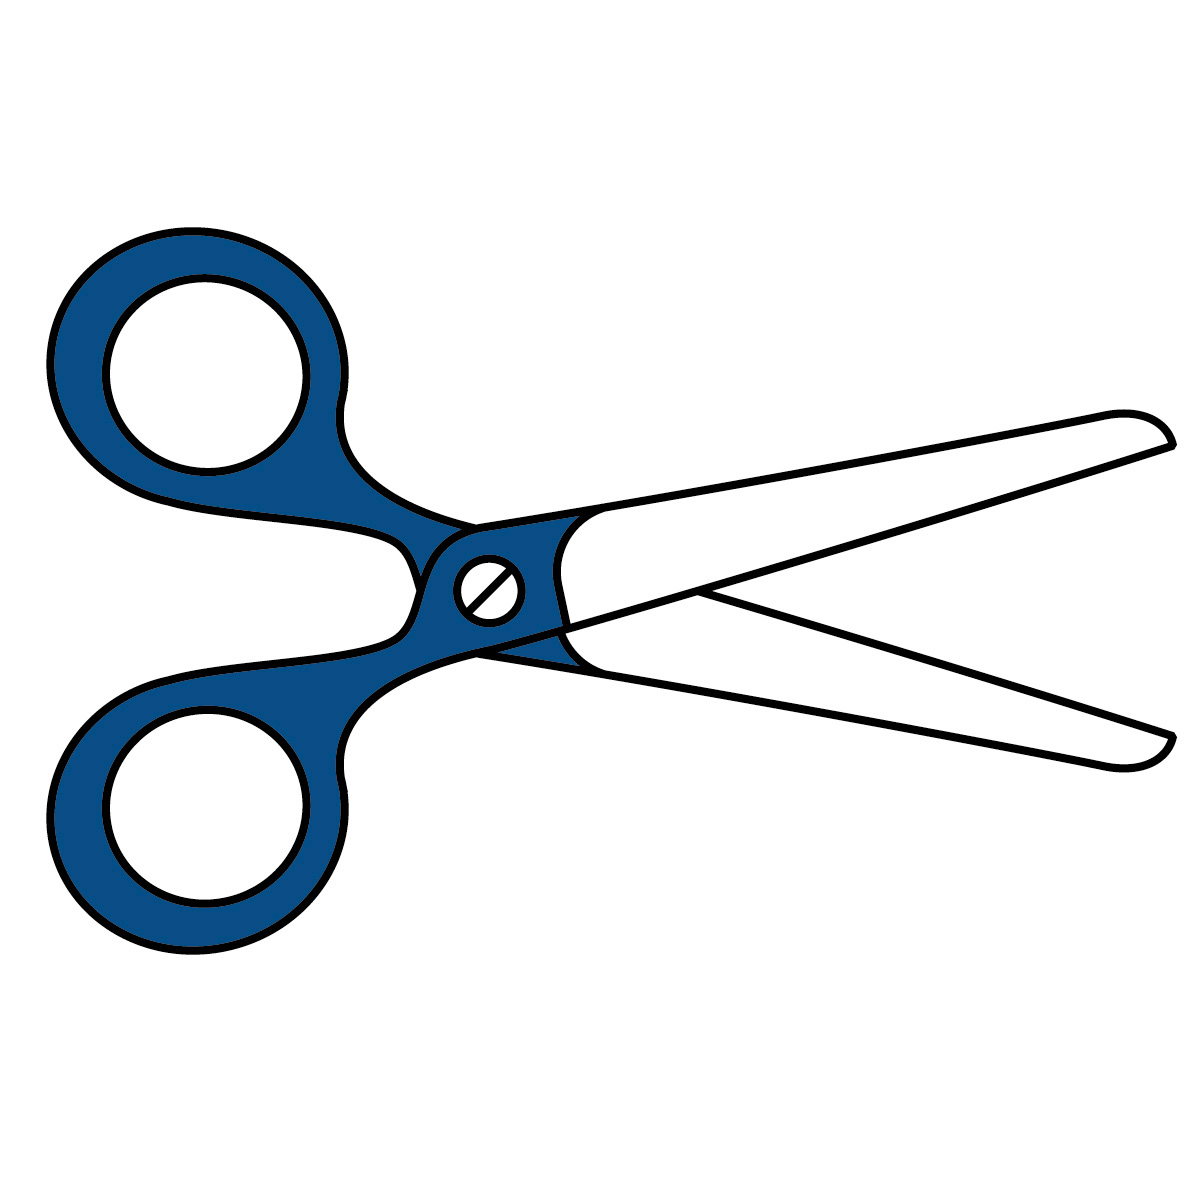 Scissors clipart black and white free clipart images 3